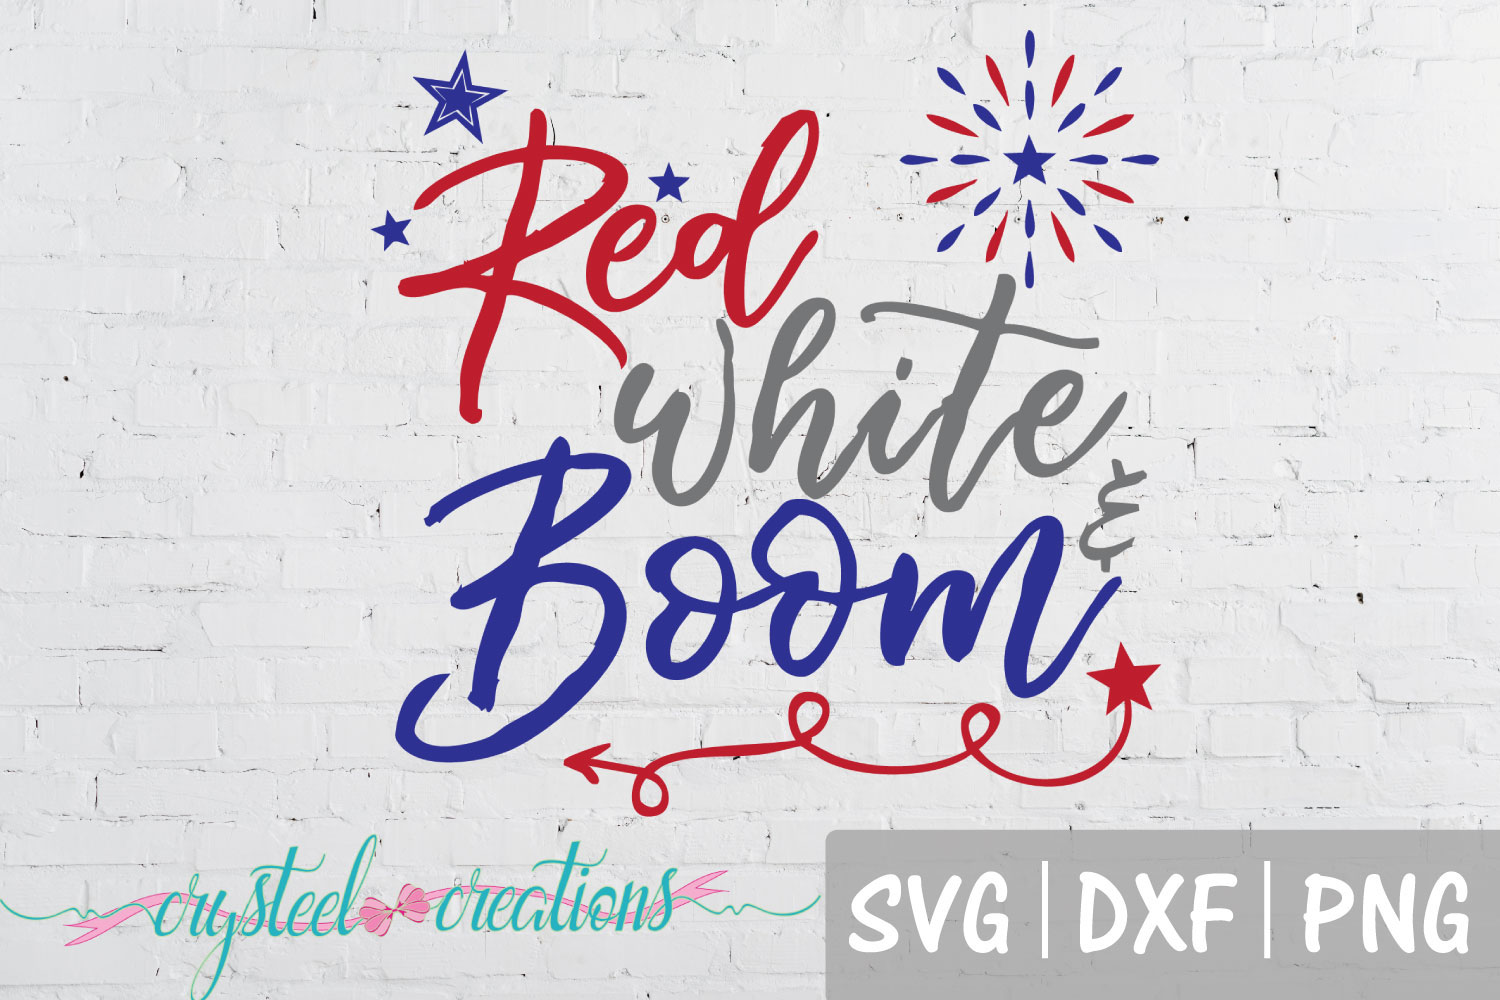 red white and boom